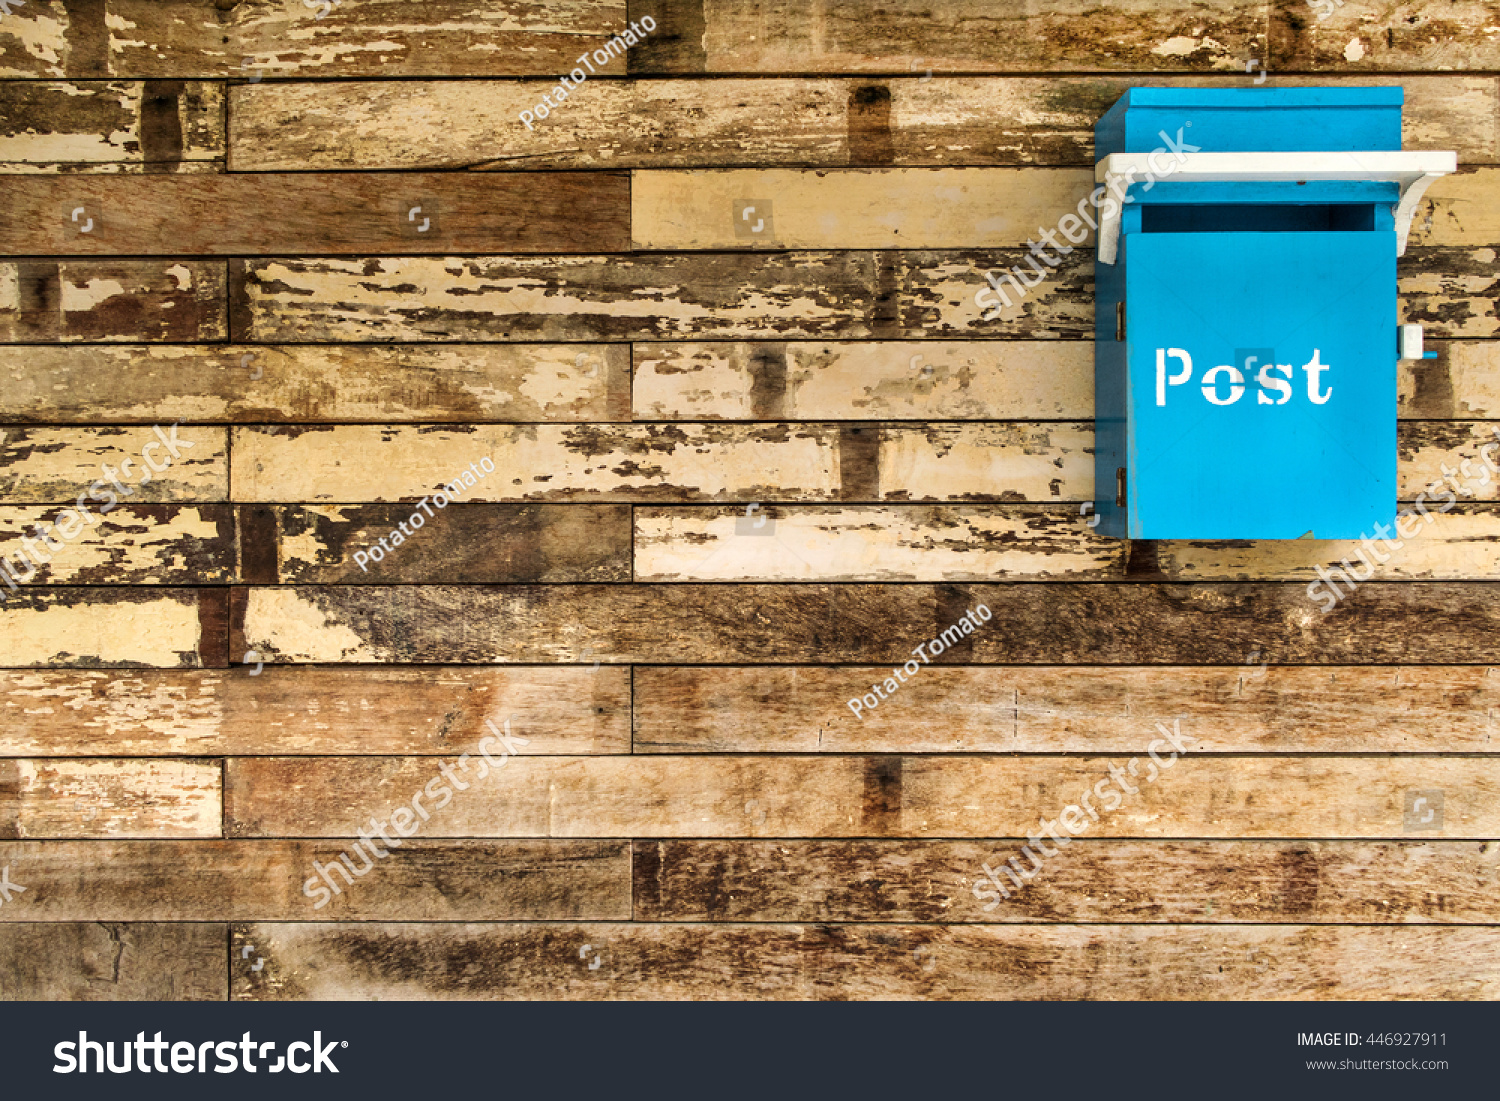 Cyan (Light blue) postbox on the old rough wooden wall #446927911